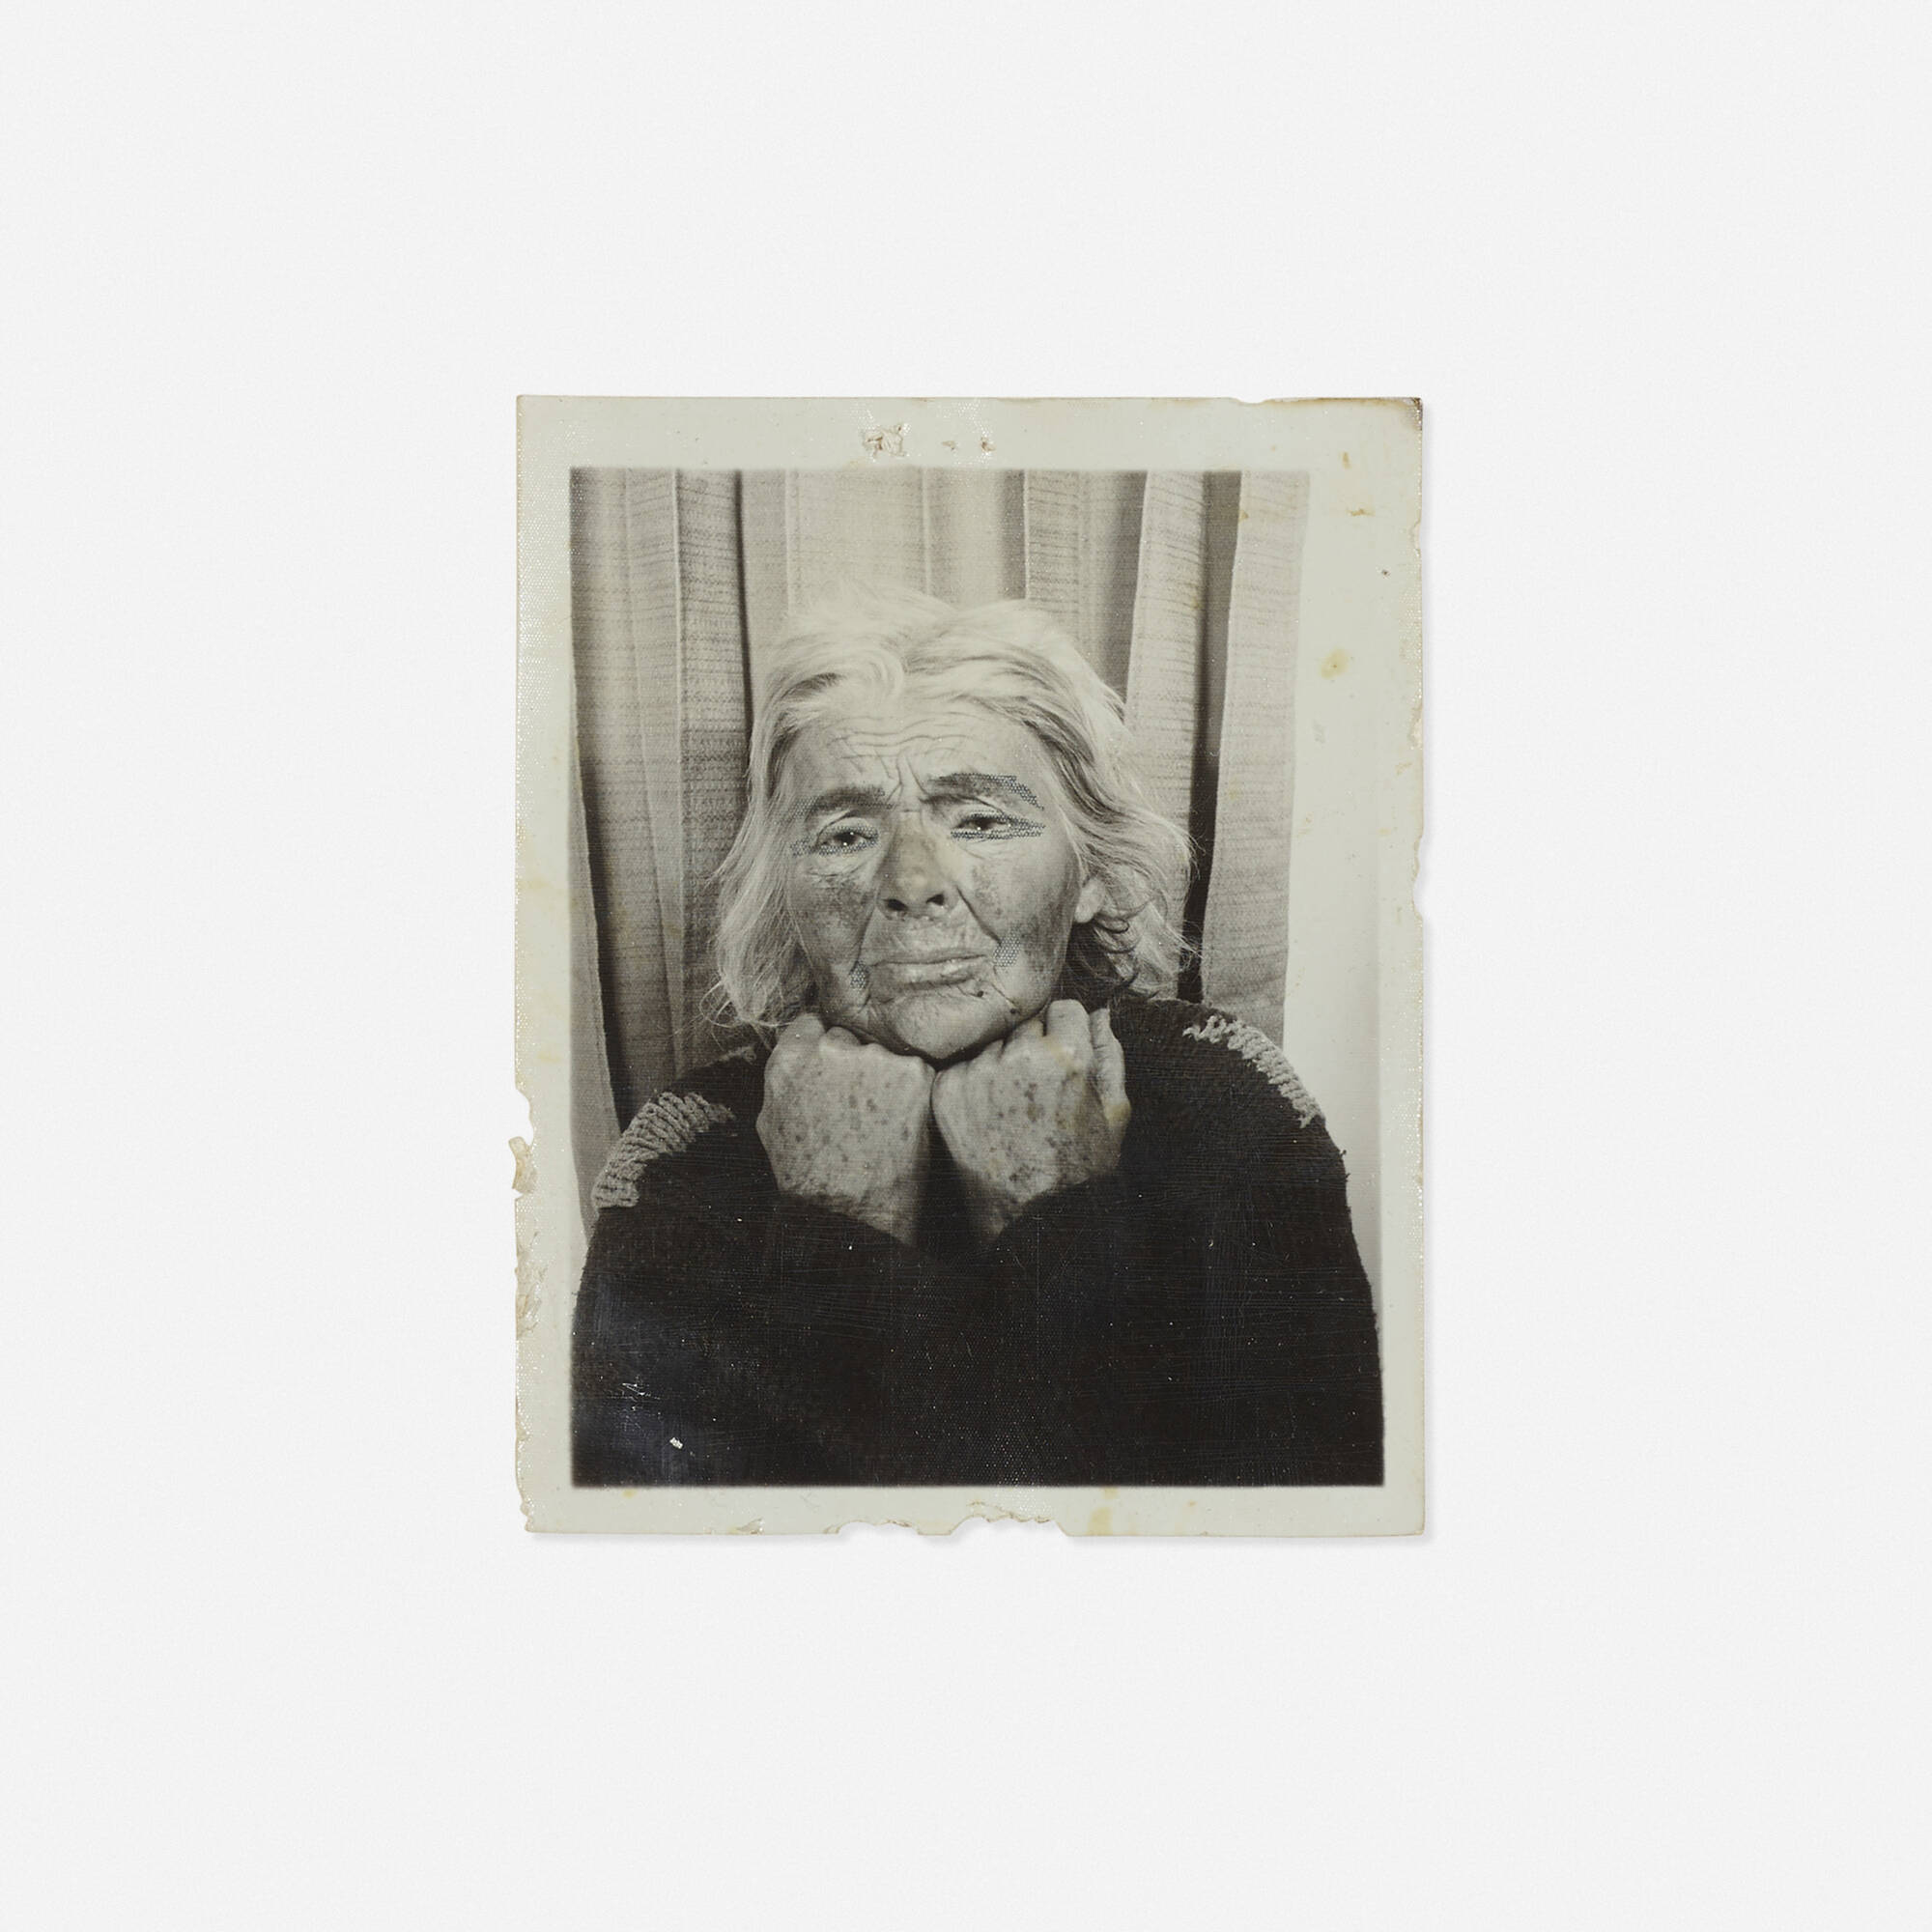 188: LEE GODIE, Untitled (photo booth self-portrait) < Post War &  Contemporary Art, 10 November 2021 < Auctions | Wright: Auctions of Art and  Design